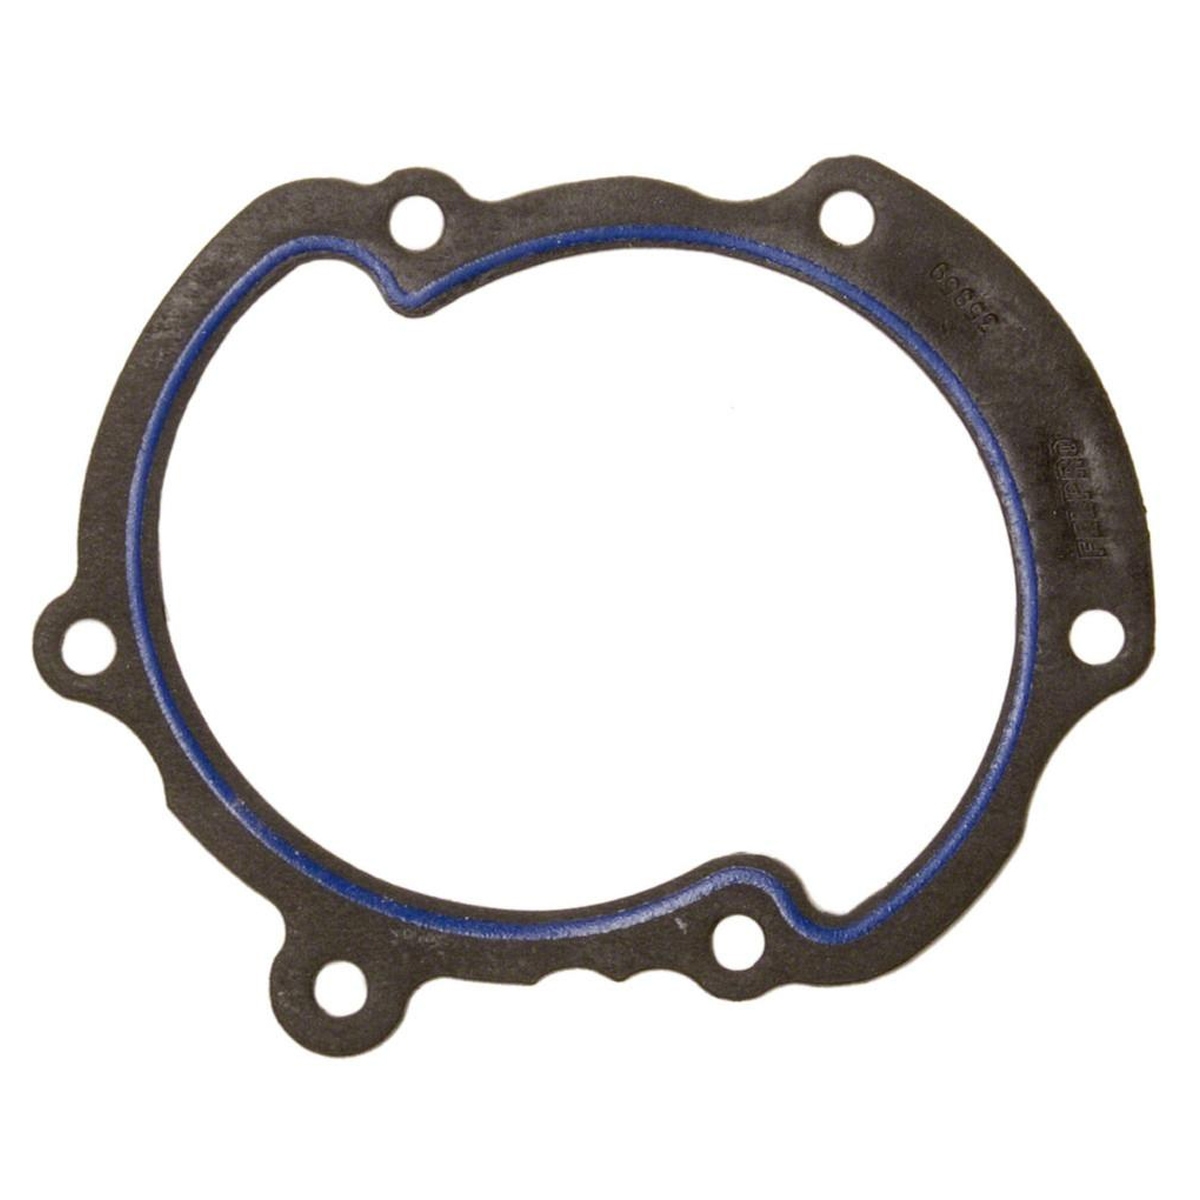 MERCEDES-BENZ MARCO POLO Water Pump Gasket